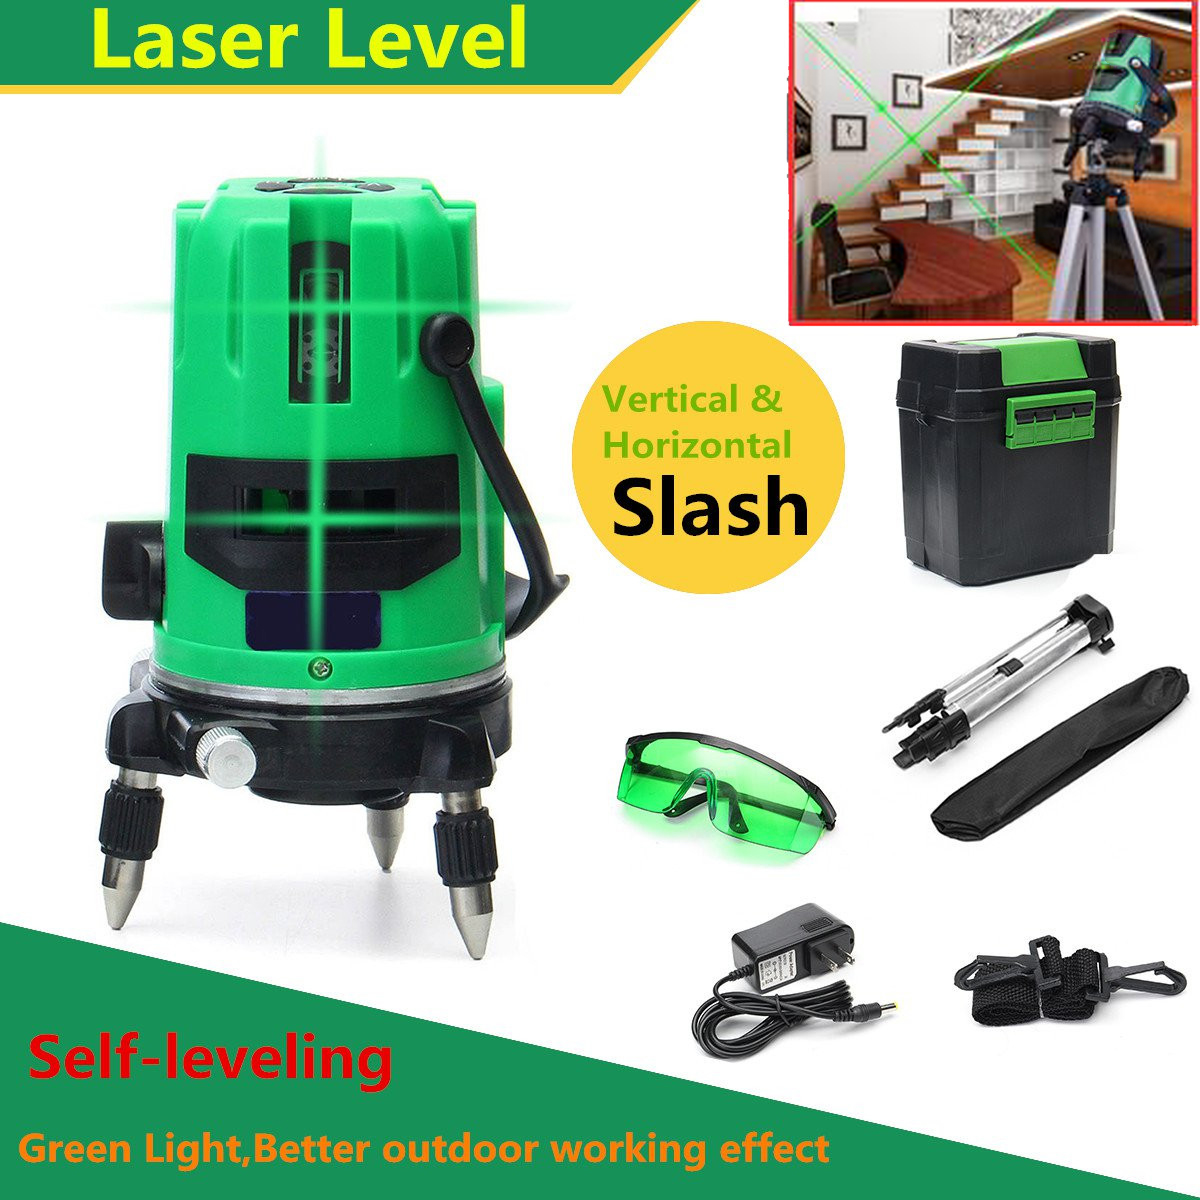 Green-2-Line-2-Points-Laser-Level-360-Rotary-Laser-Line-Self-Leveling-with-Tripod-1166735-1